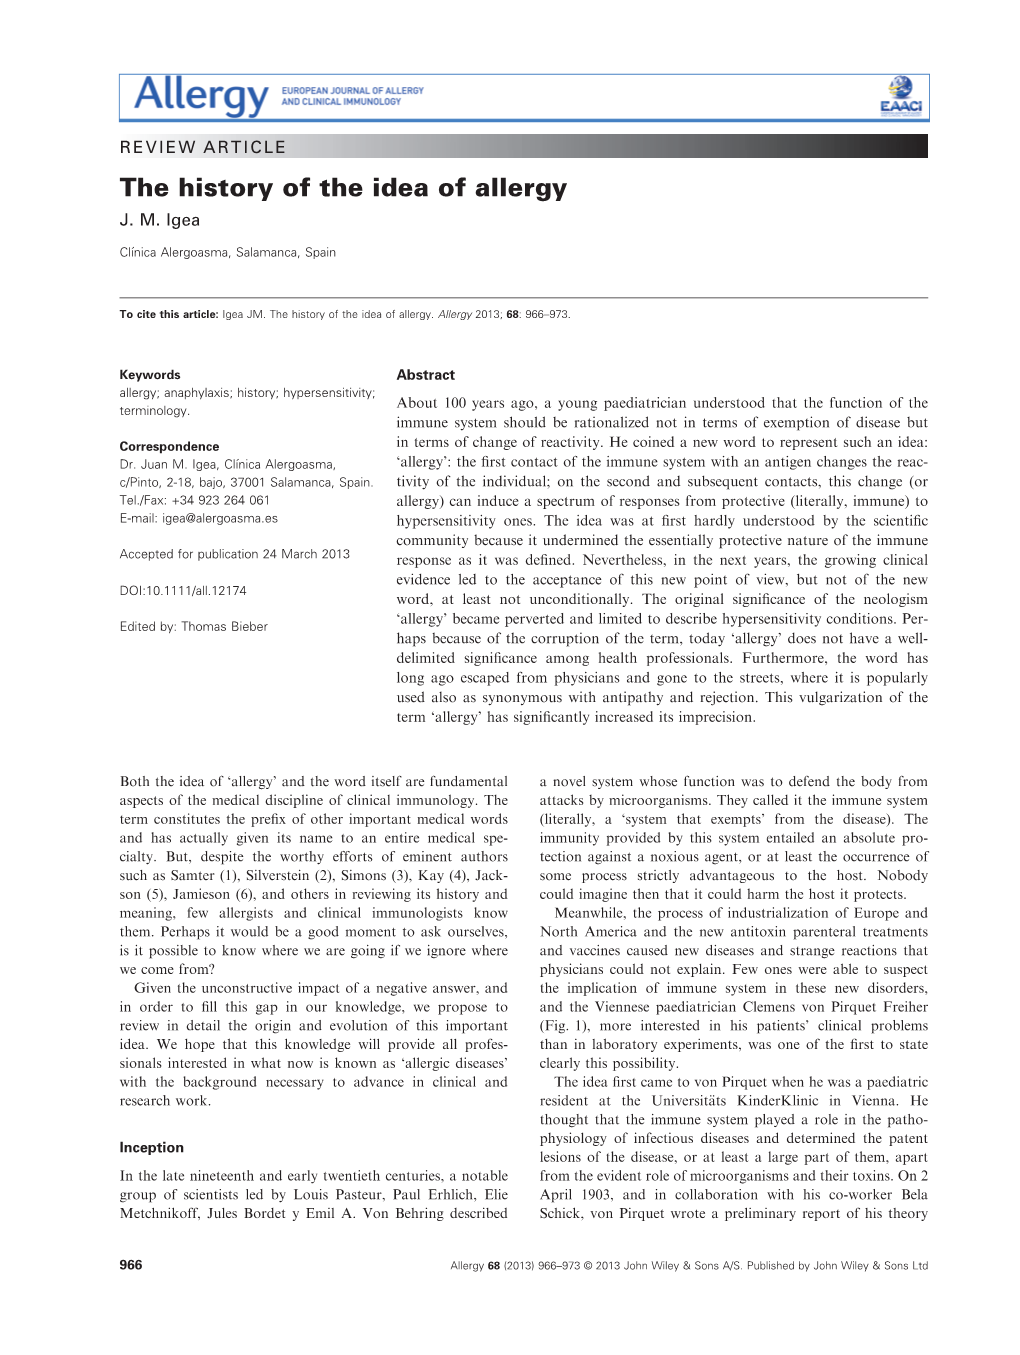 The History of the Idea of Allergy J